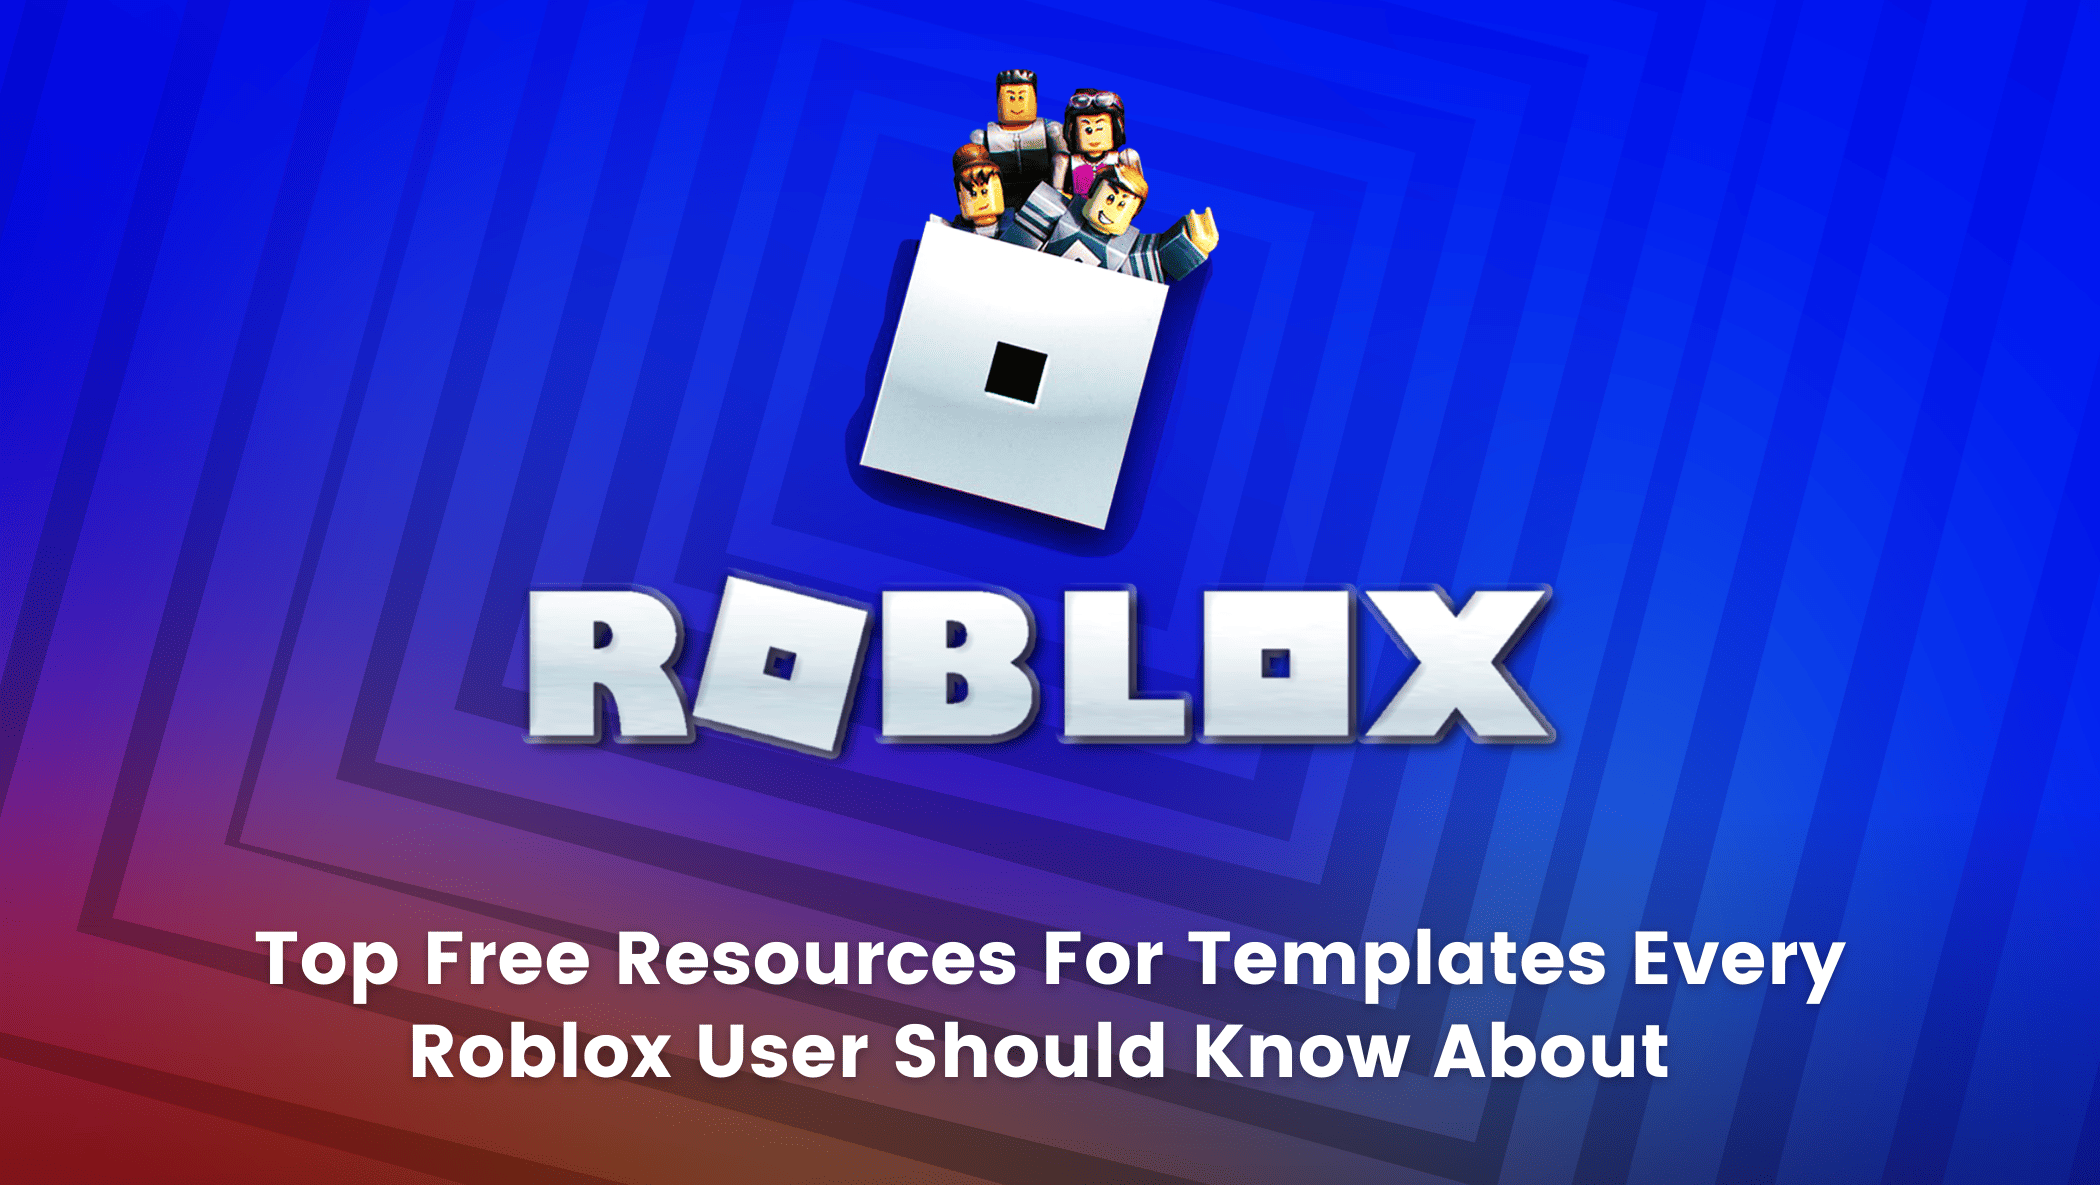 Top Free Resources For Templates Every Roblox User Should Know About